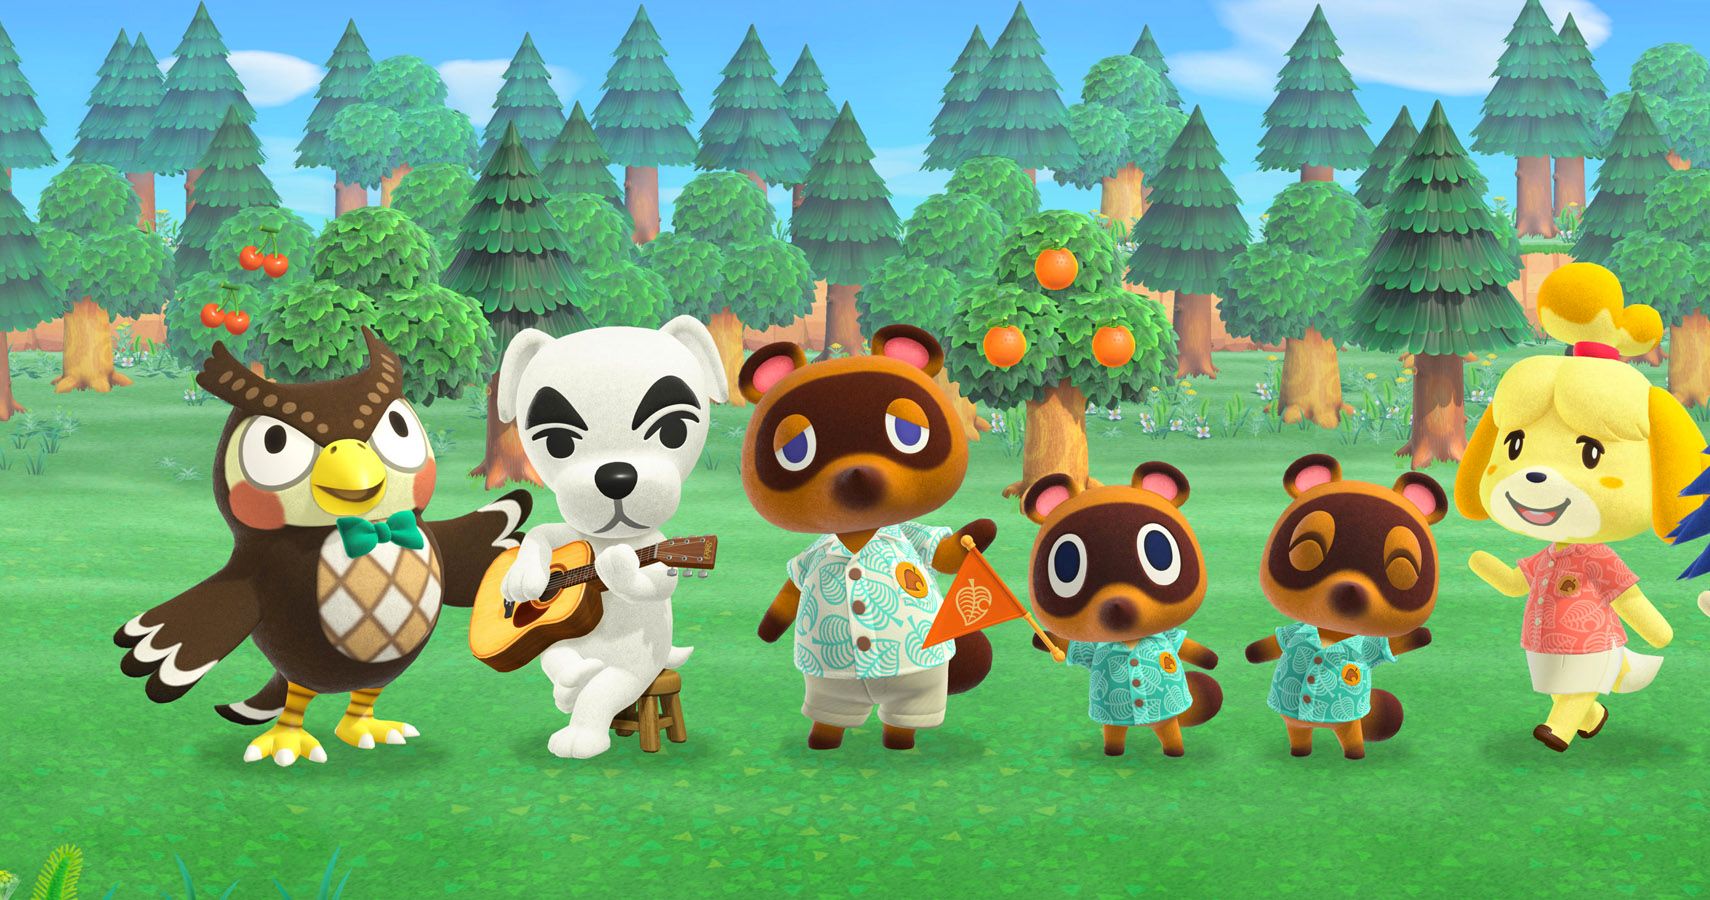 10 Games To Play With Online Friends In Animal Crossing: New Horizons